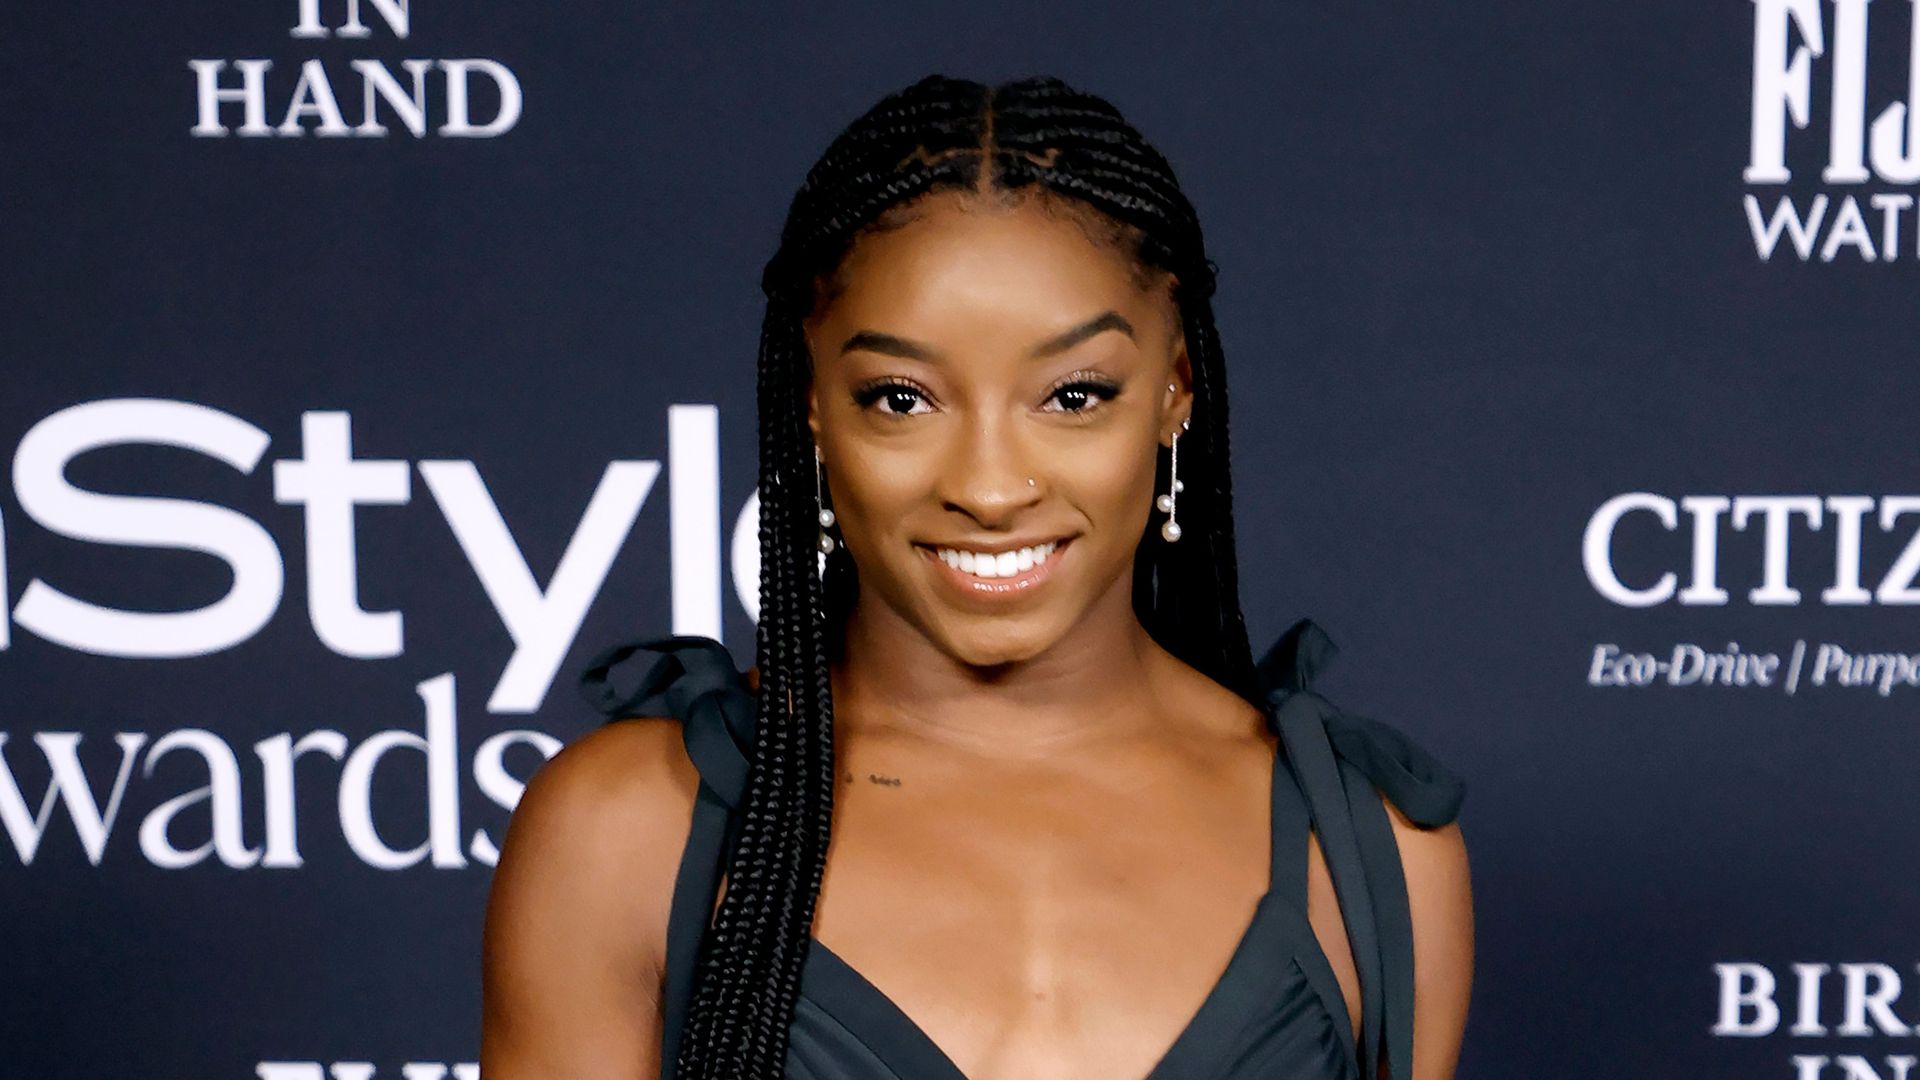 Simone Biles attends the 6th Annual InStyle Awards on November 15, 2021 in Los Angeles, California.